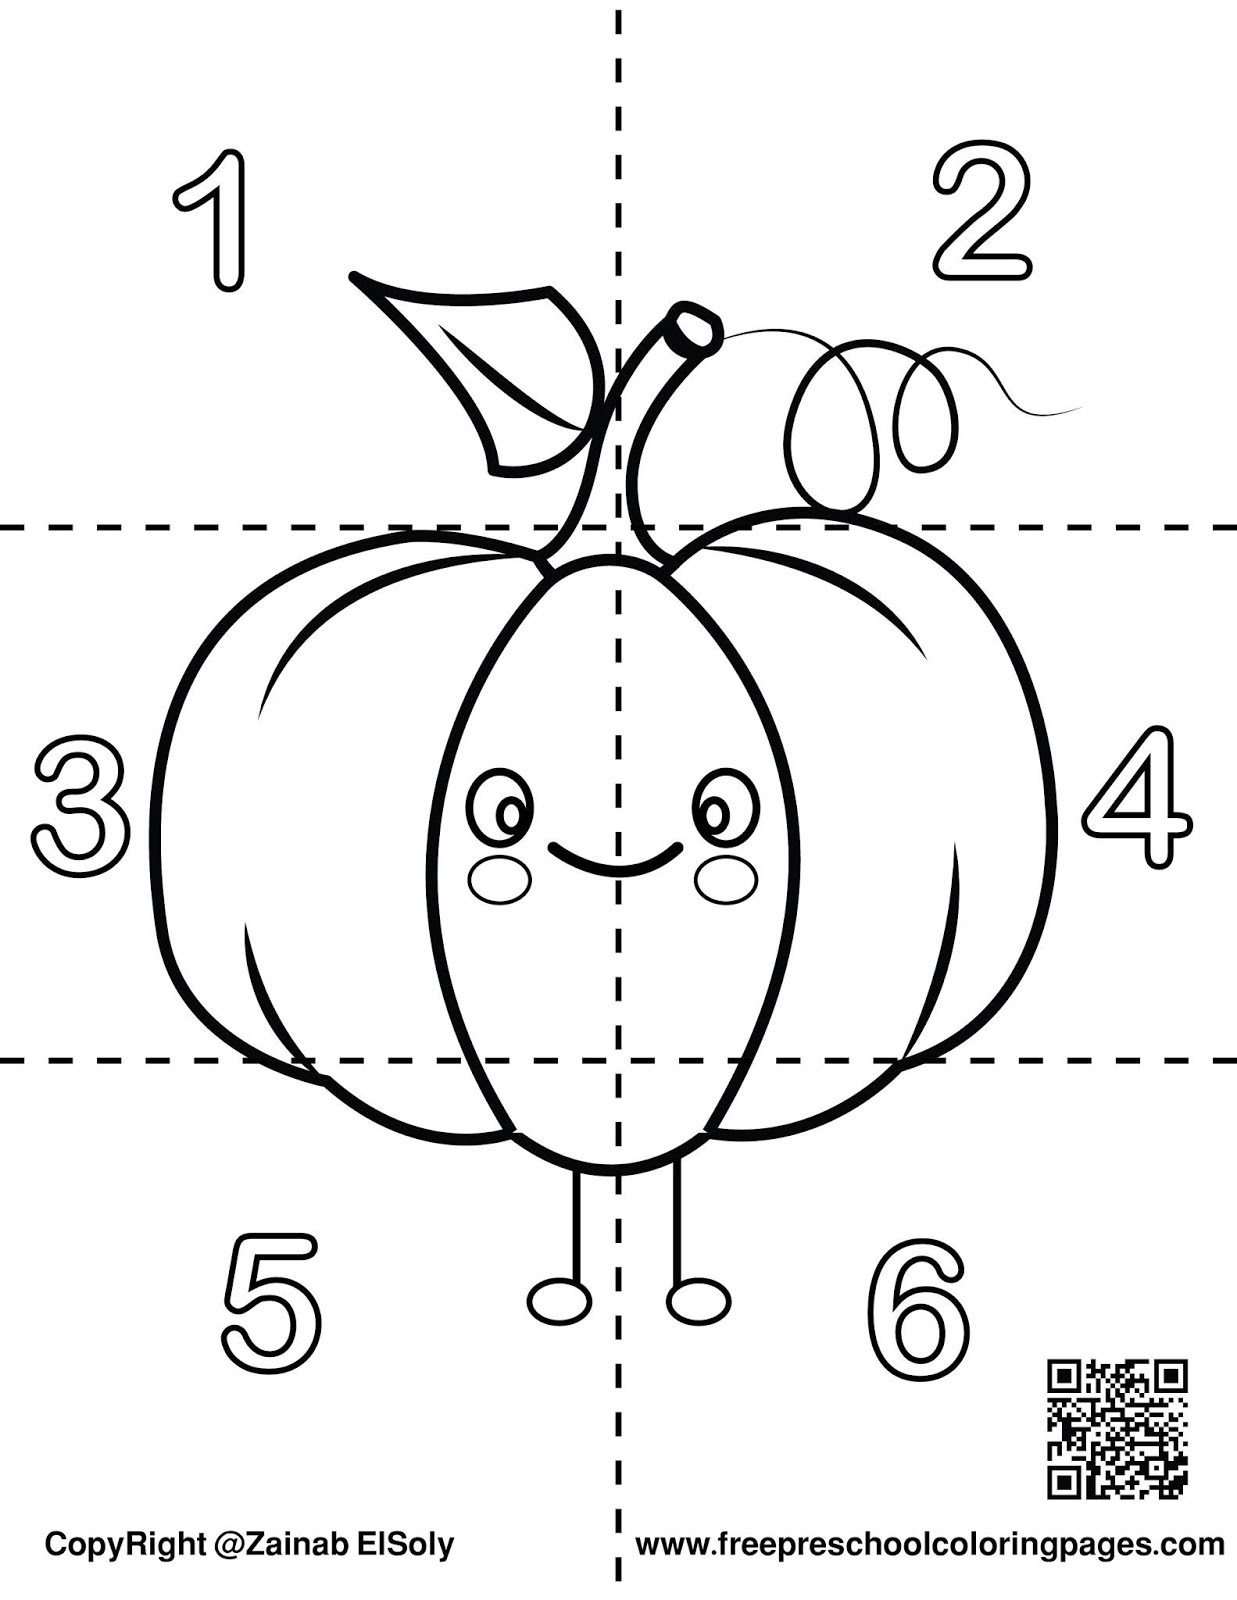 Download set of cute food square puzzle- learn to count 1 -6